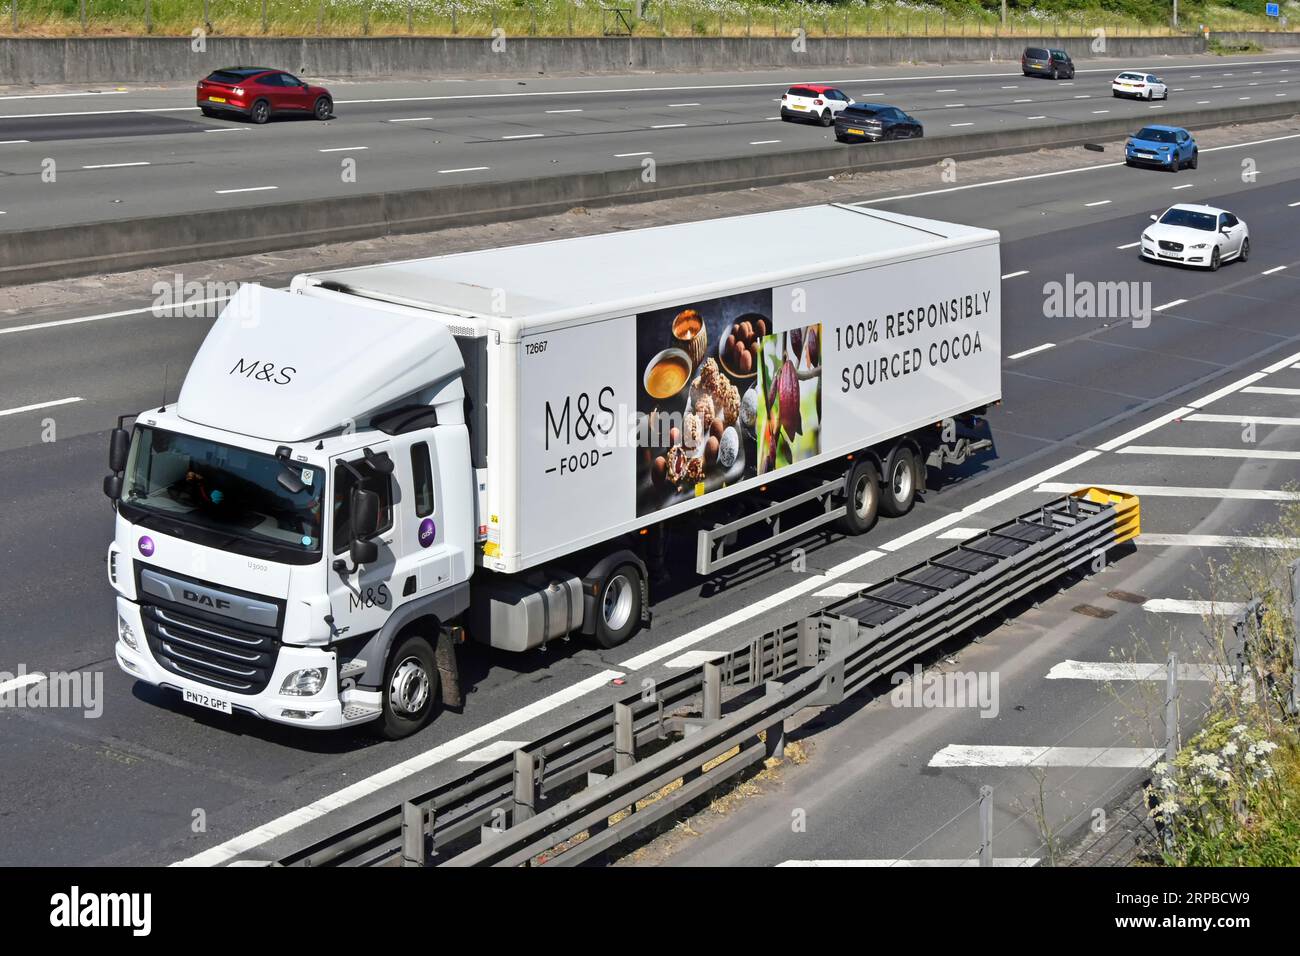 Aerial front side view Gist supply chain DAF hgv lorry truck M&S food business advert 100% responsibly sourced cocoa on semi trailer M25 motorway UK Stock Photo